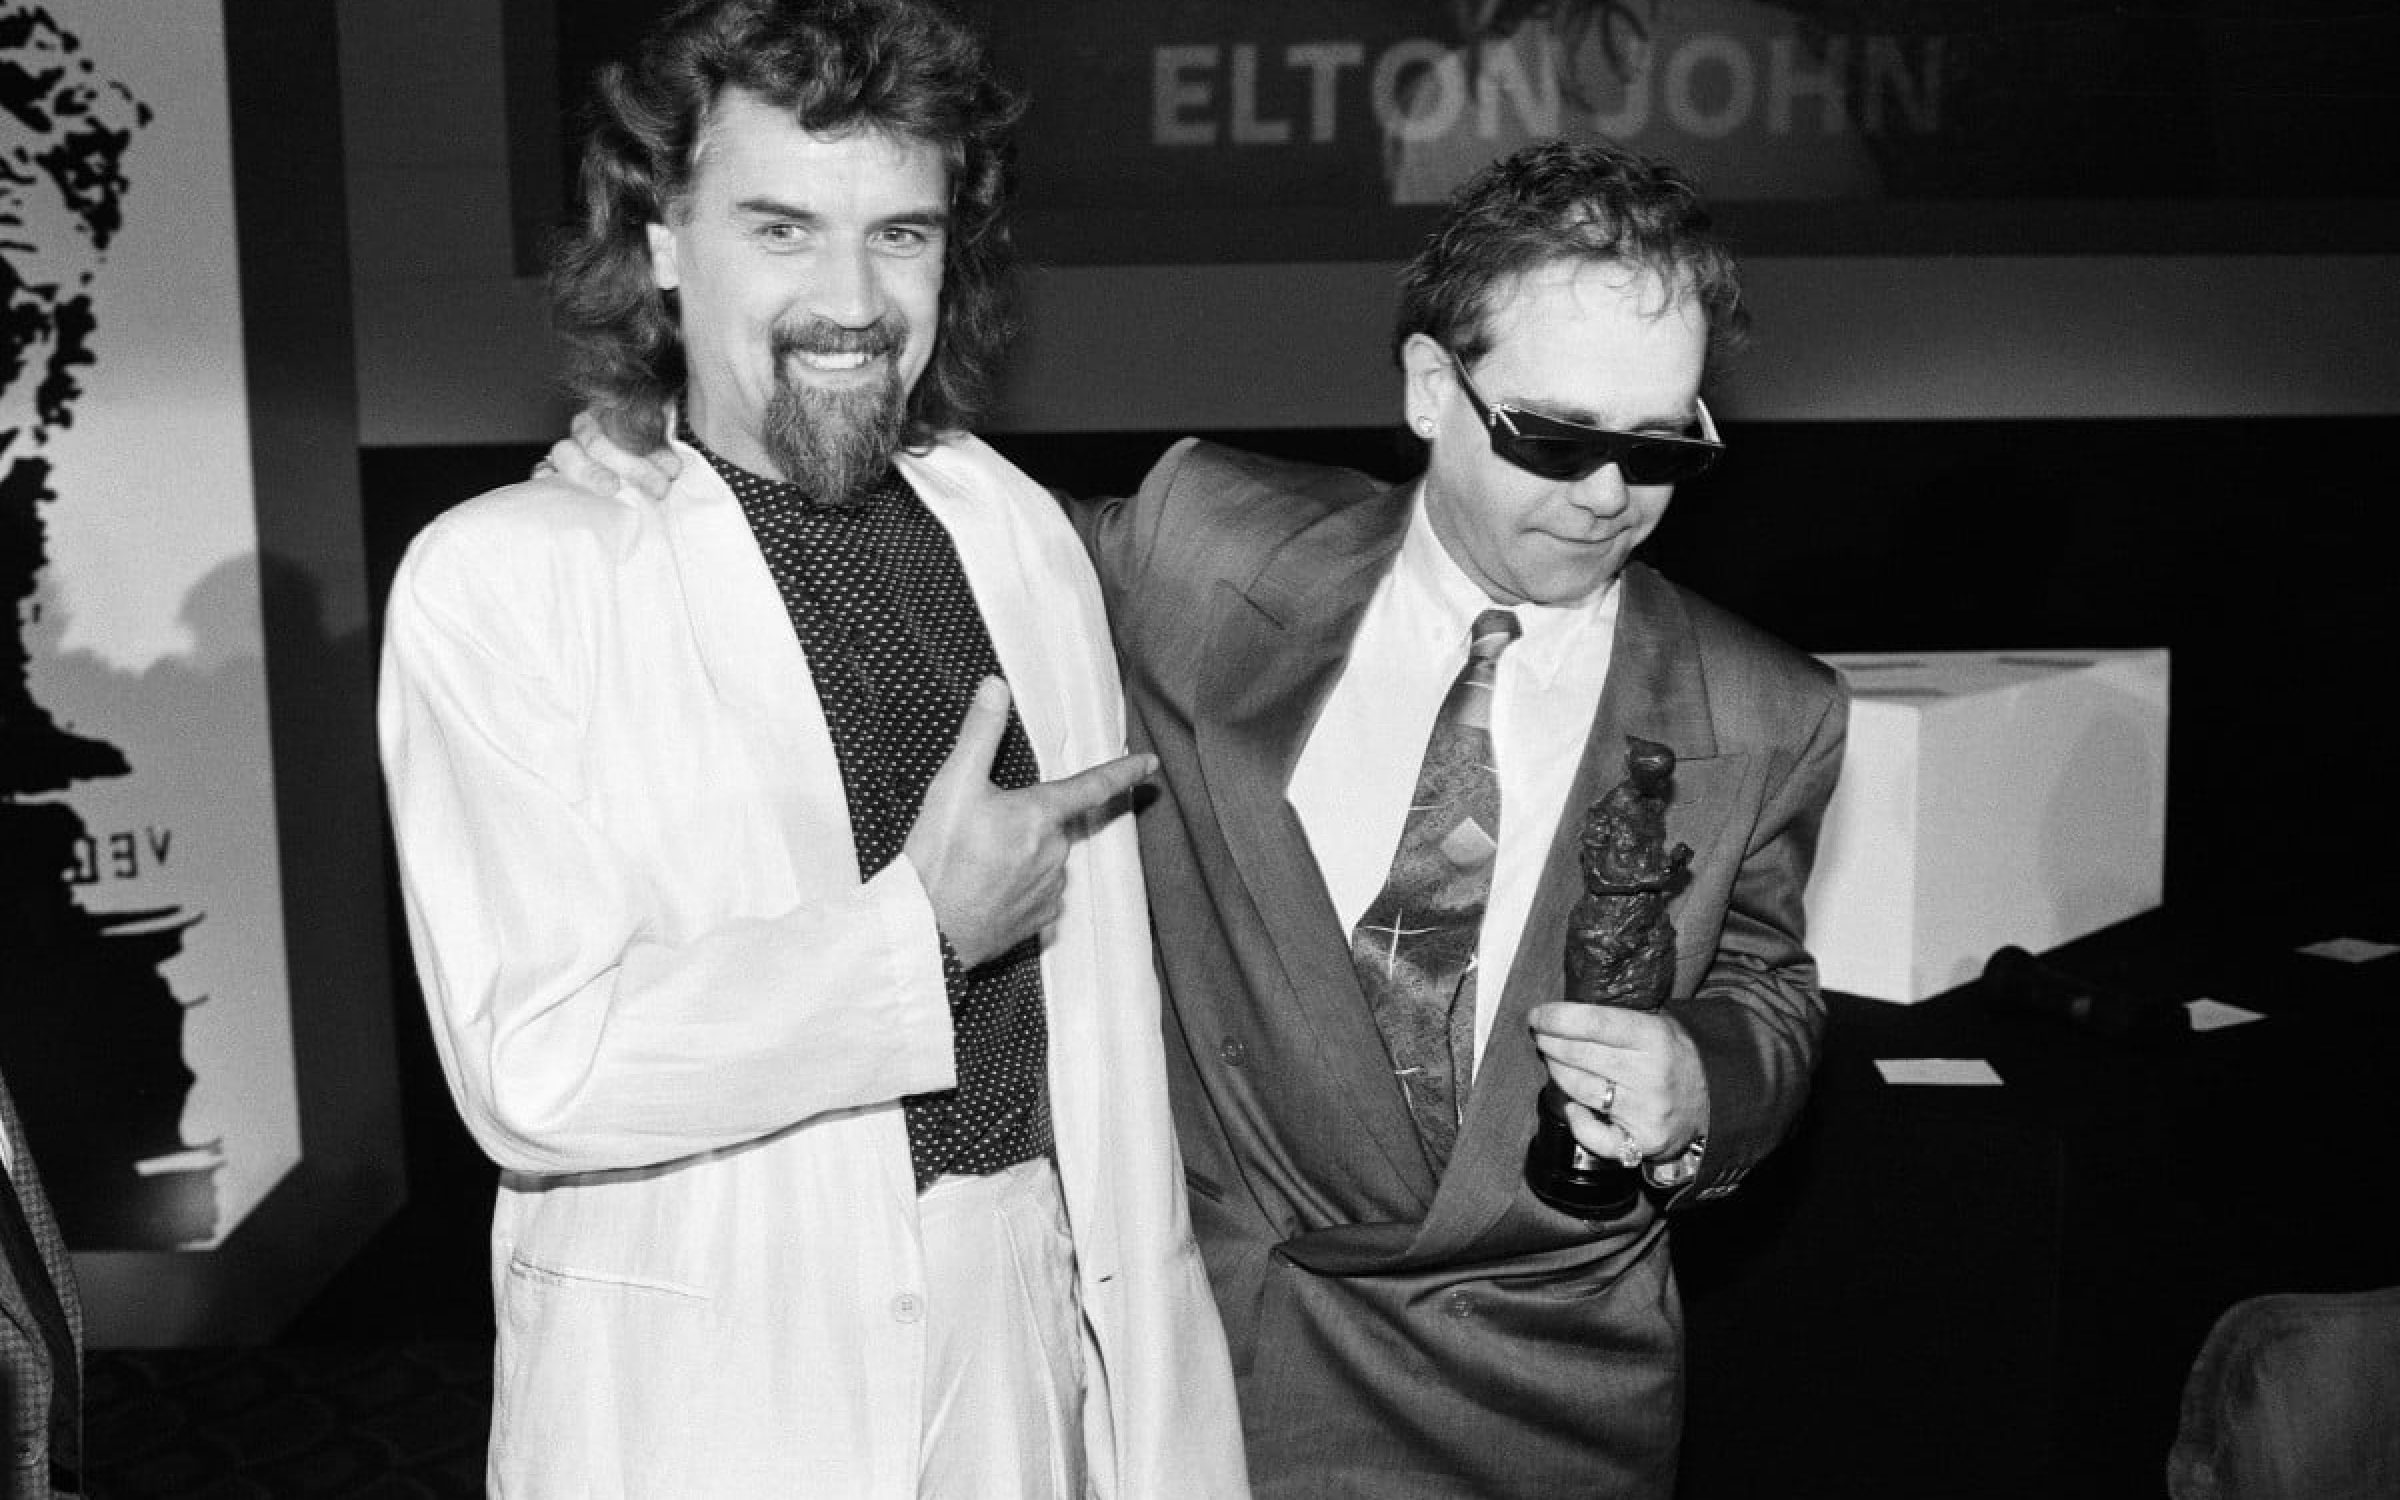 The Ivor Novello Awards at Gorsvenor House, London. Pictured, Billy Connolly and Elton John. 7th April 1986.